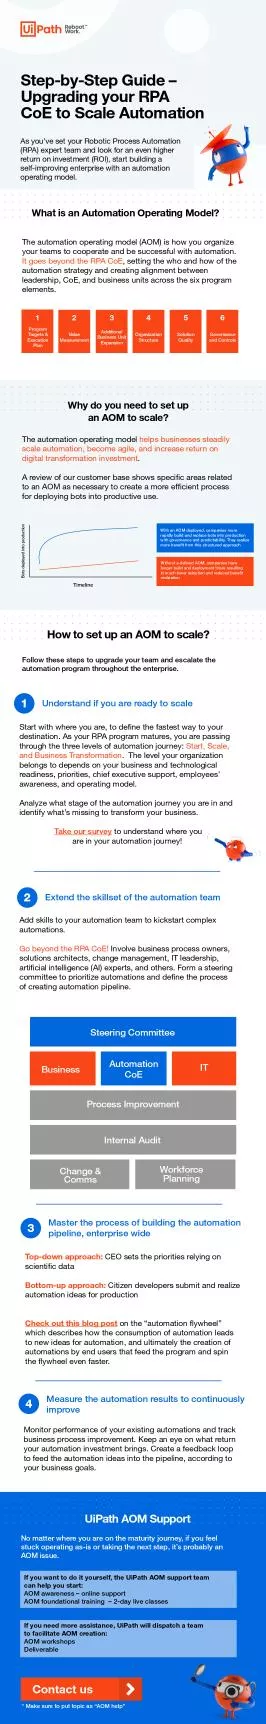 As you146ve set your Robotic Process Automation RPA expert team a